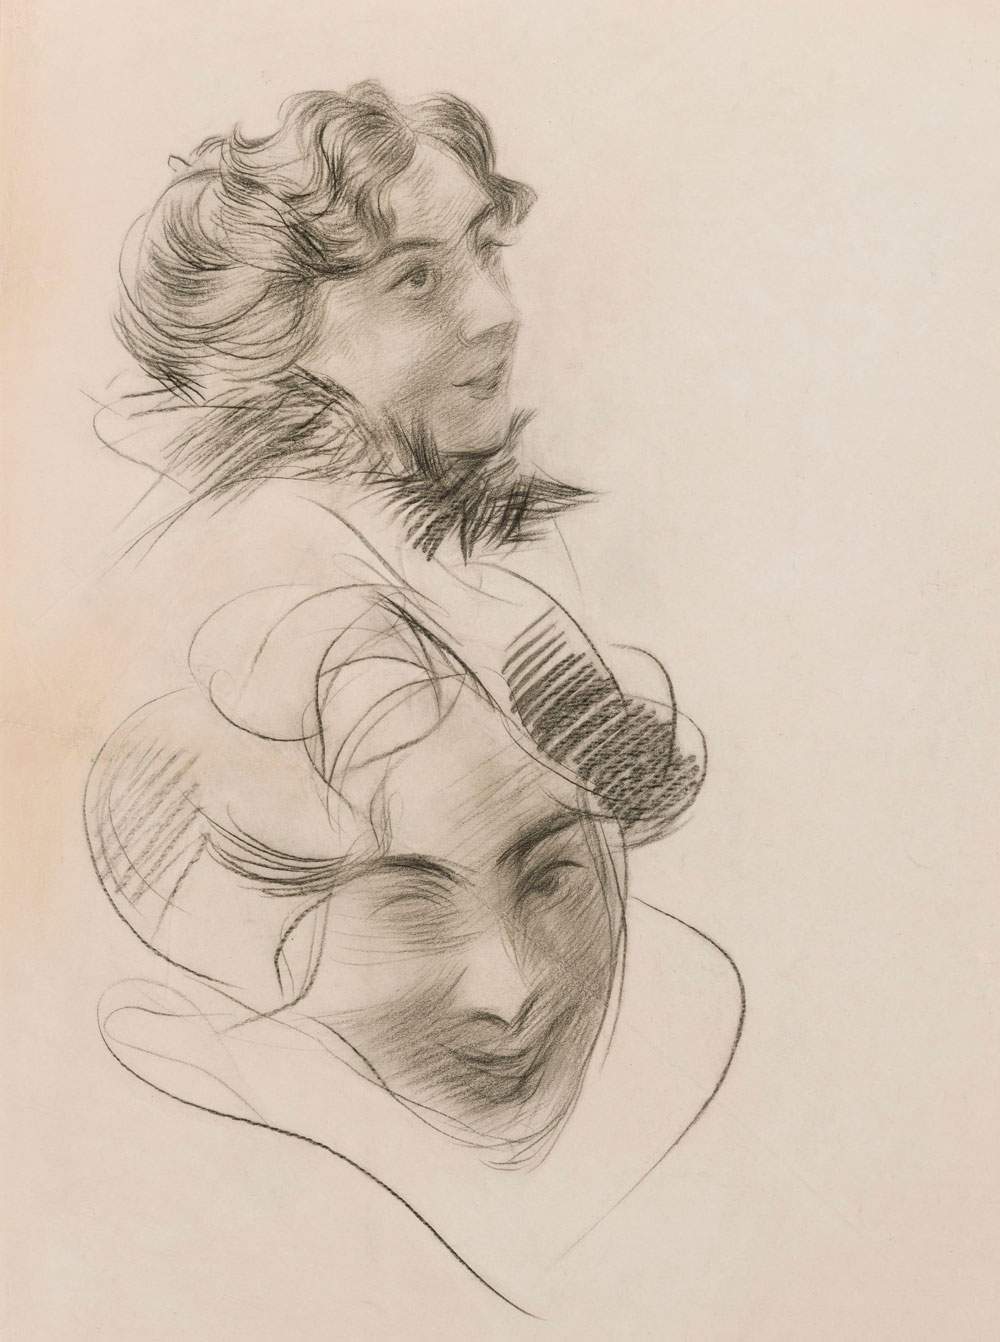 Giovanni Boldini's drawings collected in exhibition in Bologna